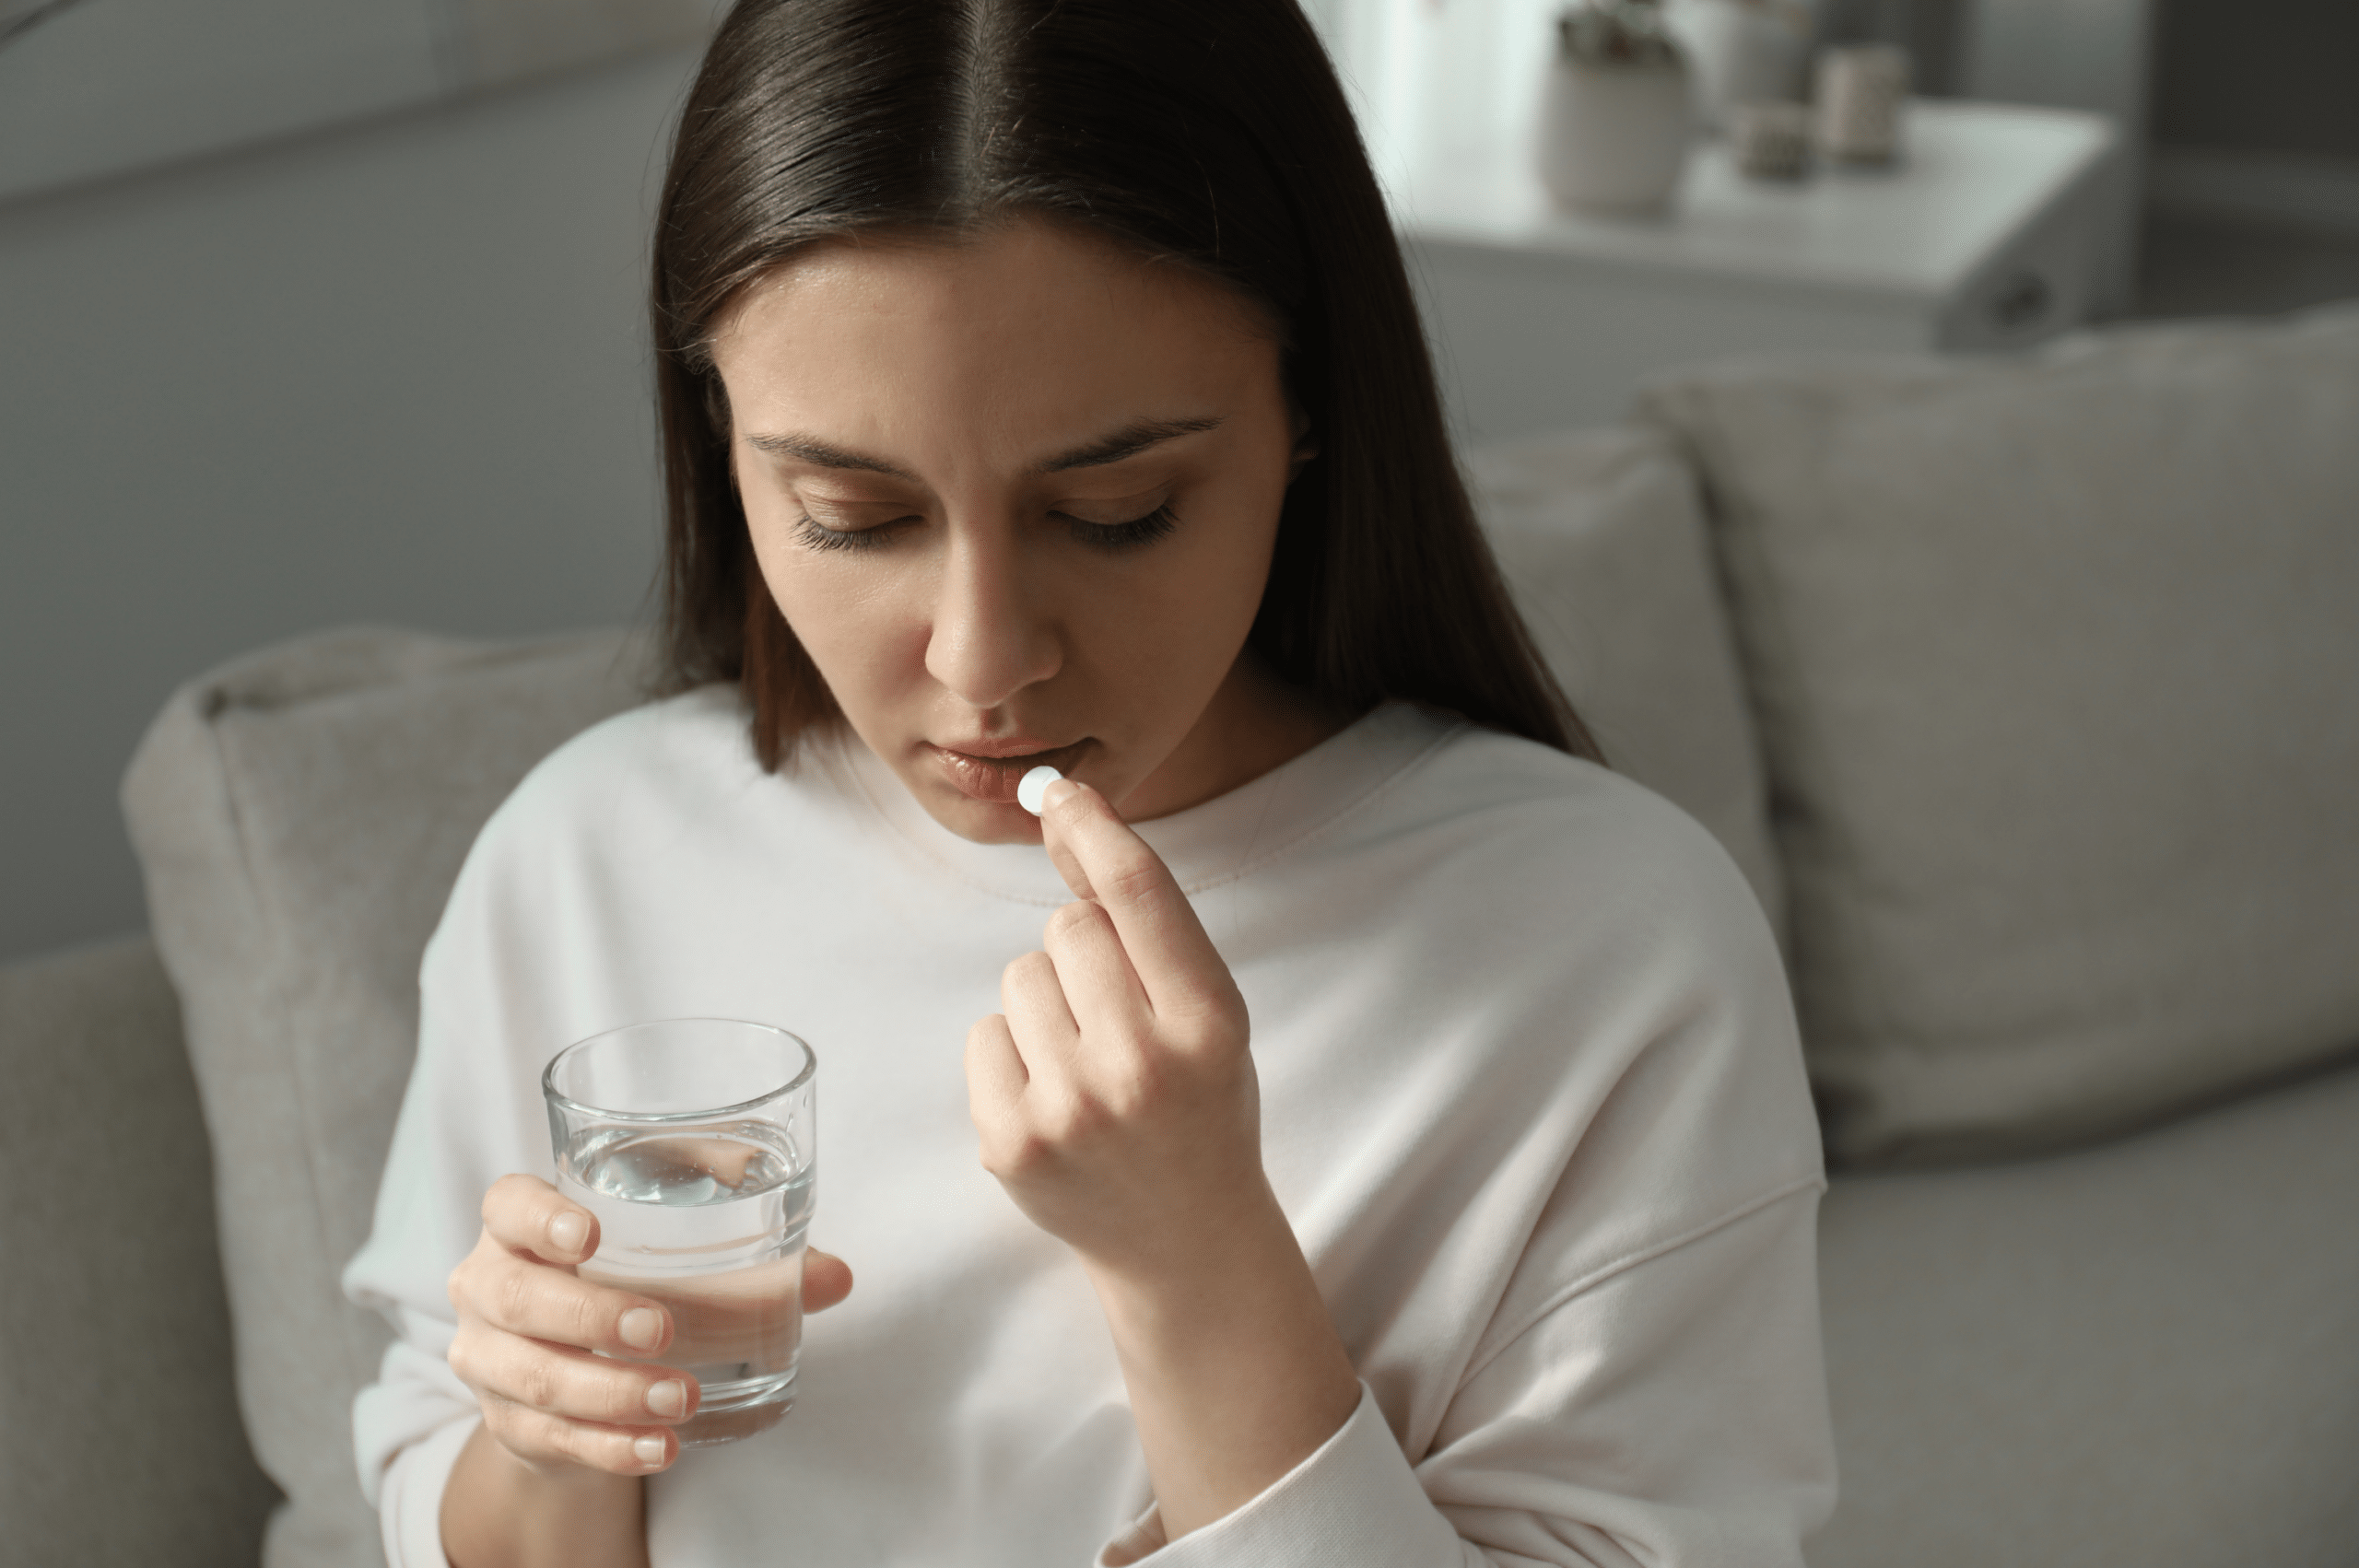 A woman holding a glass of water preparing to take an Oxycodone pill.